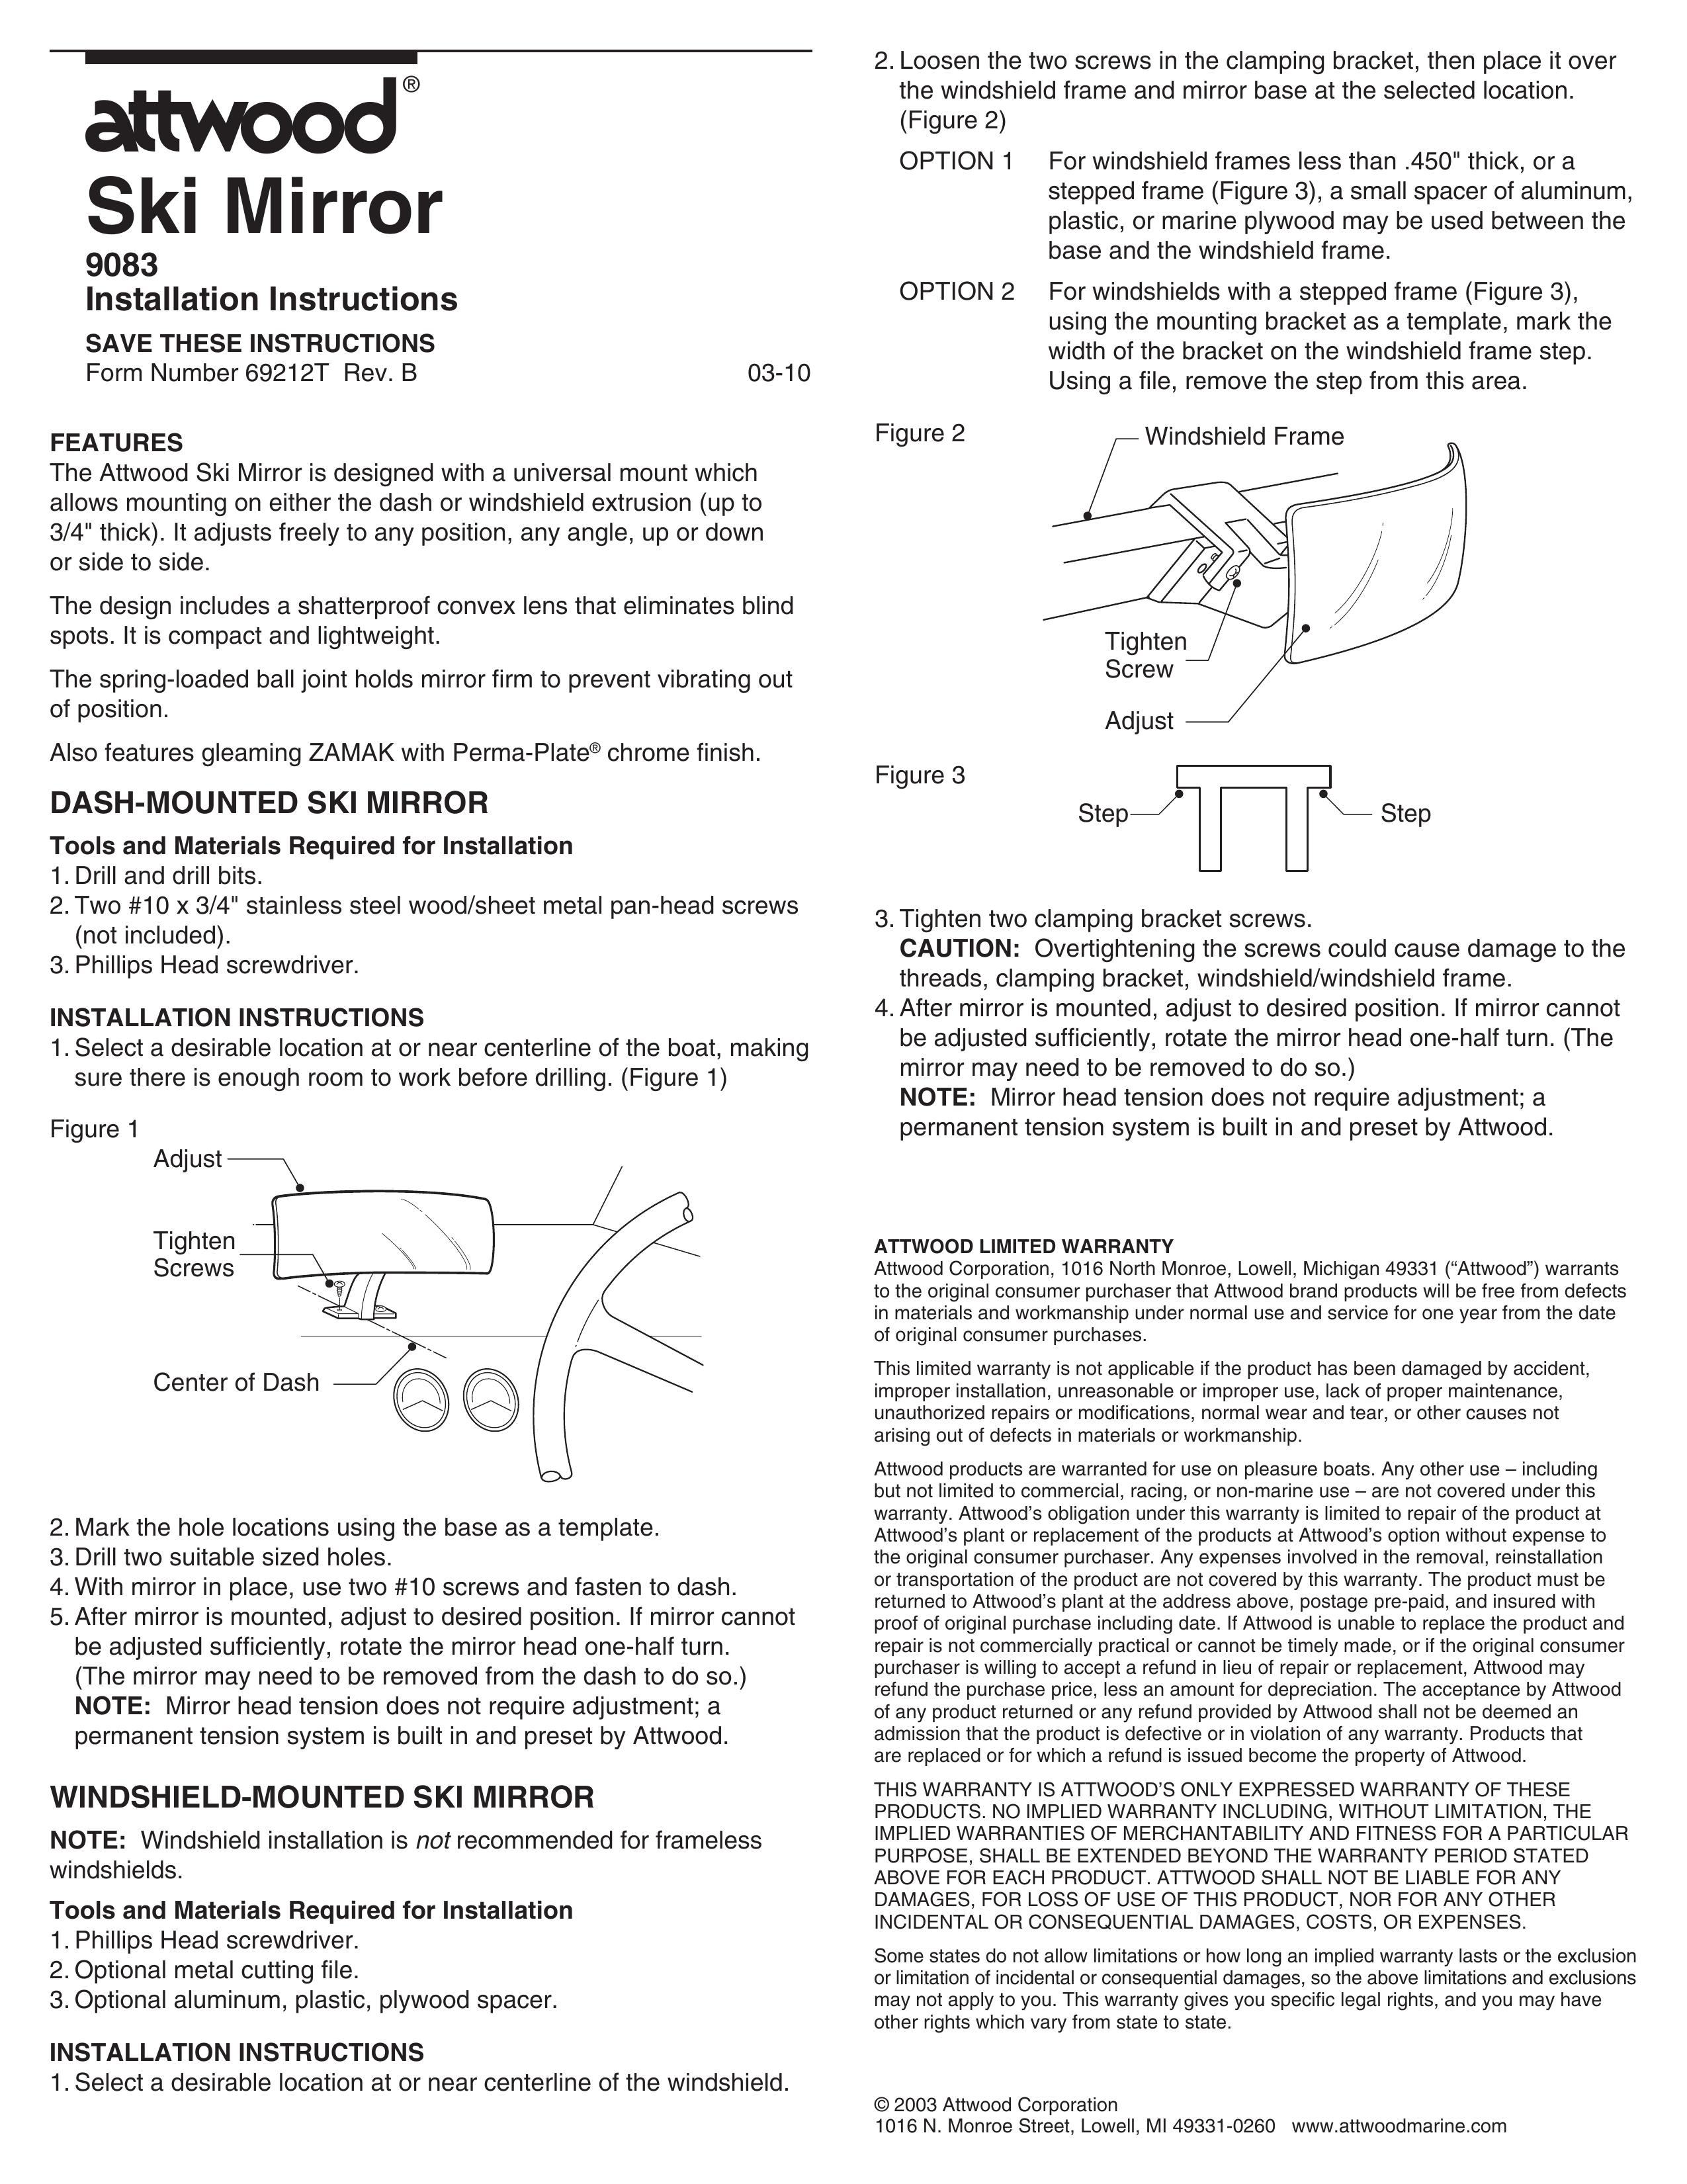 Attwood 9083 Boating Equipment User Manual (Page 1)